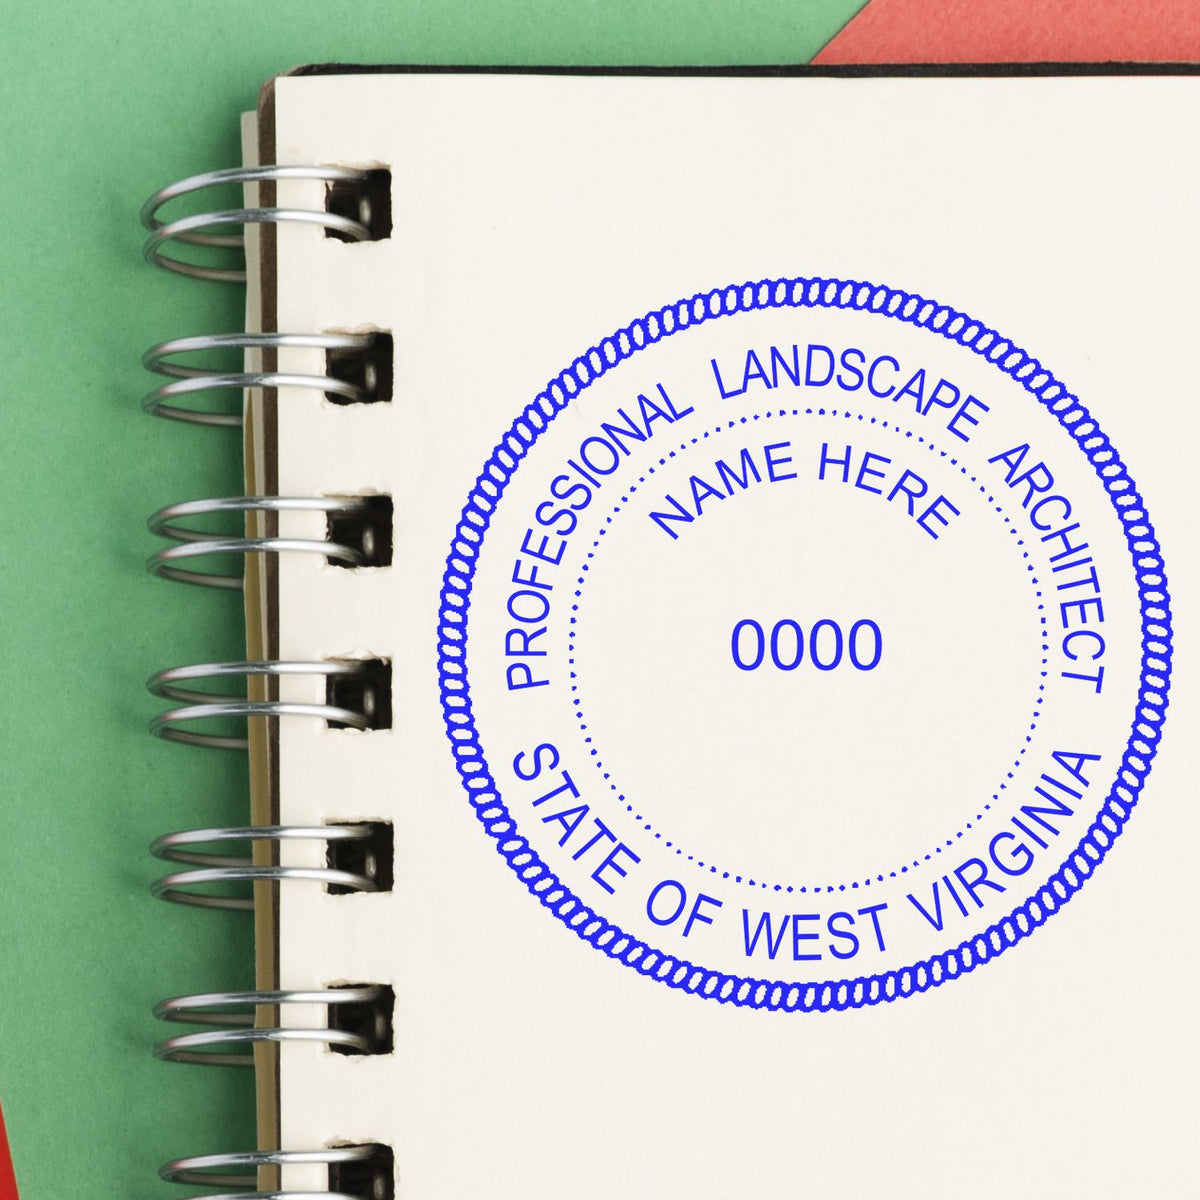 This paper is stamped with a sample imprint of the Self-Inking West Virginia Landscape Architect Stamp, signifying its quality and reliability.